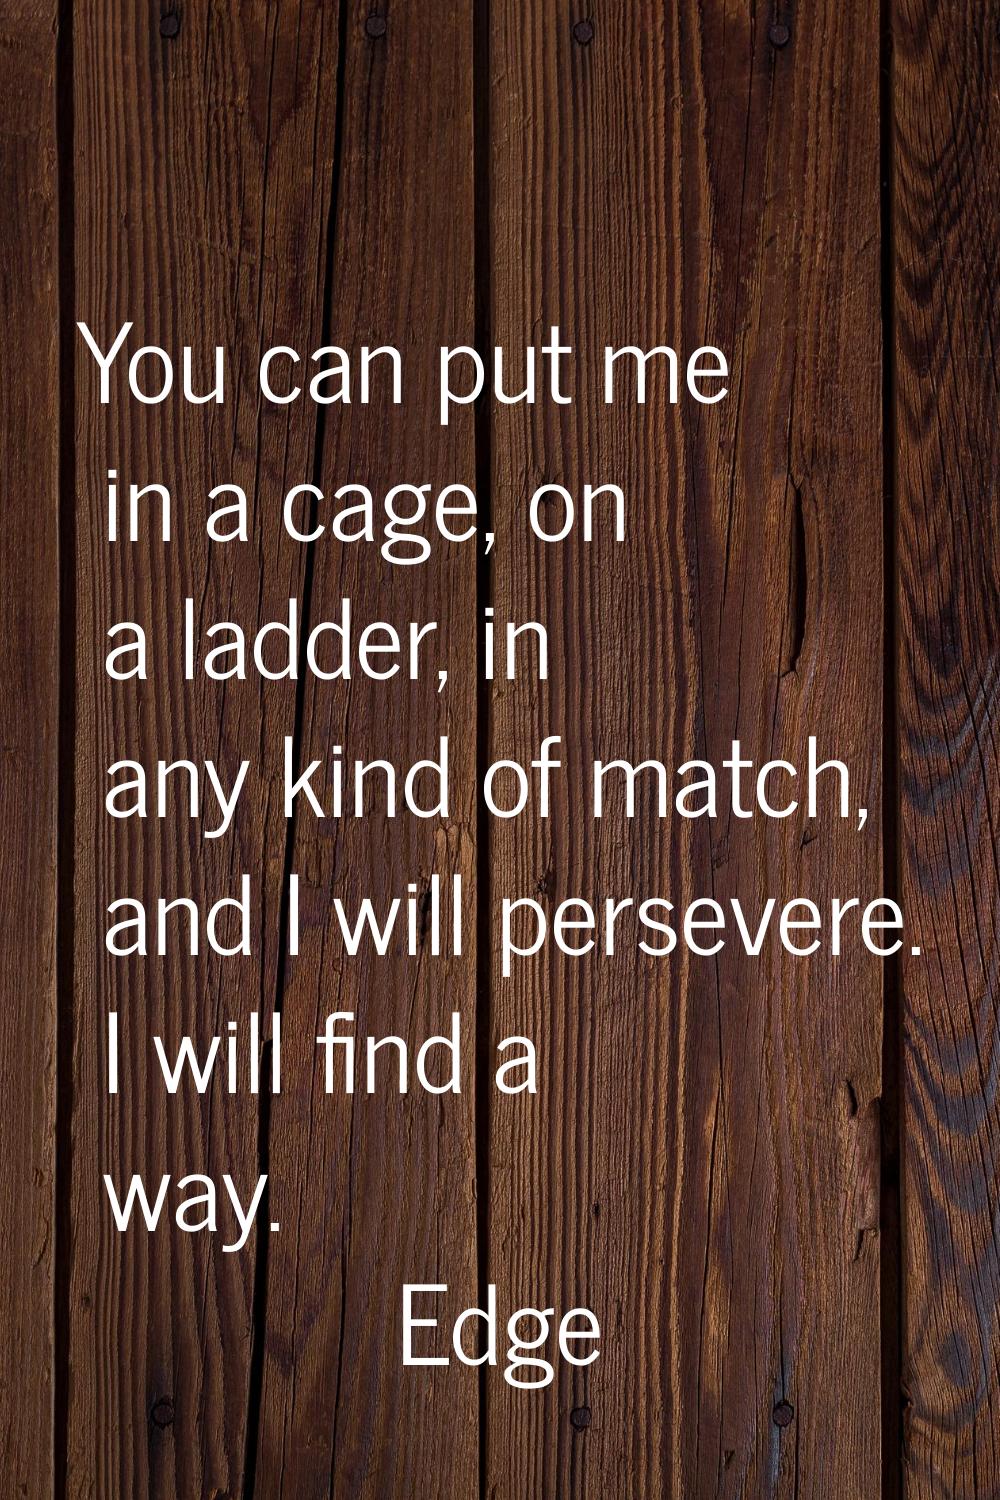 You can put me in a cage, on a ladder, in any kind of match, and I will persevere. I will find a wa